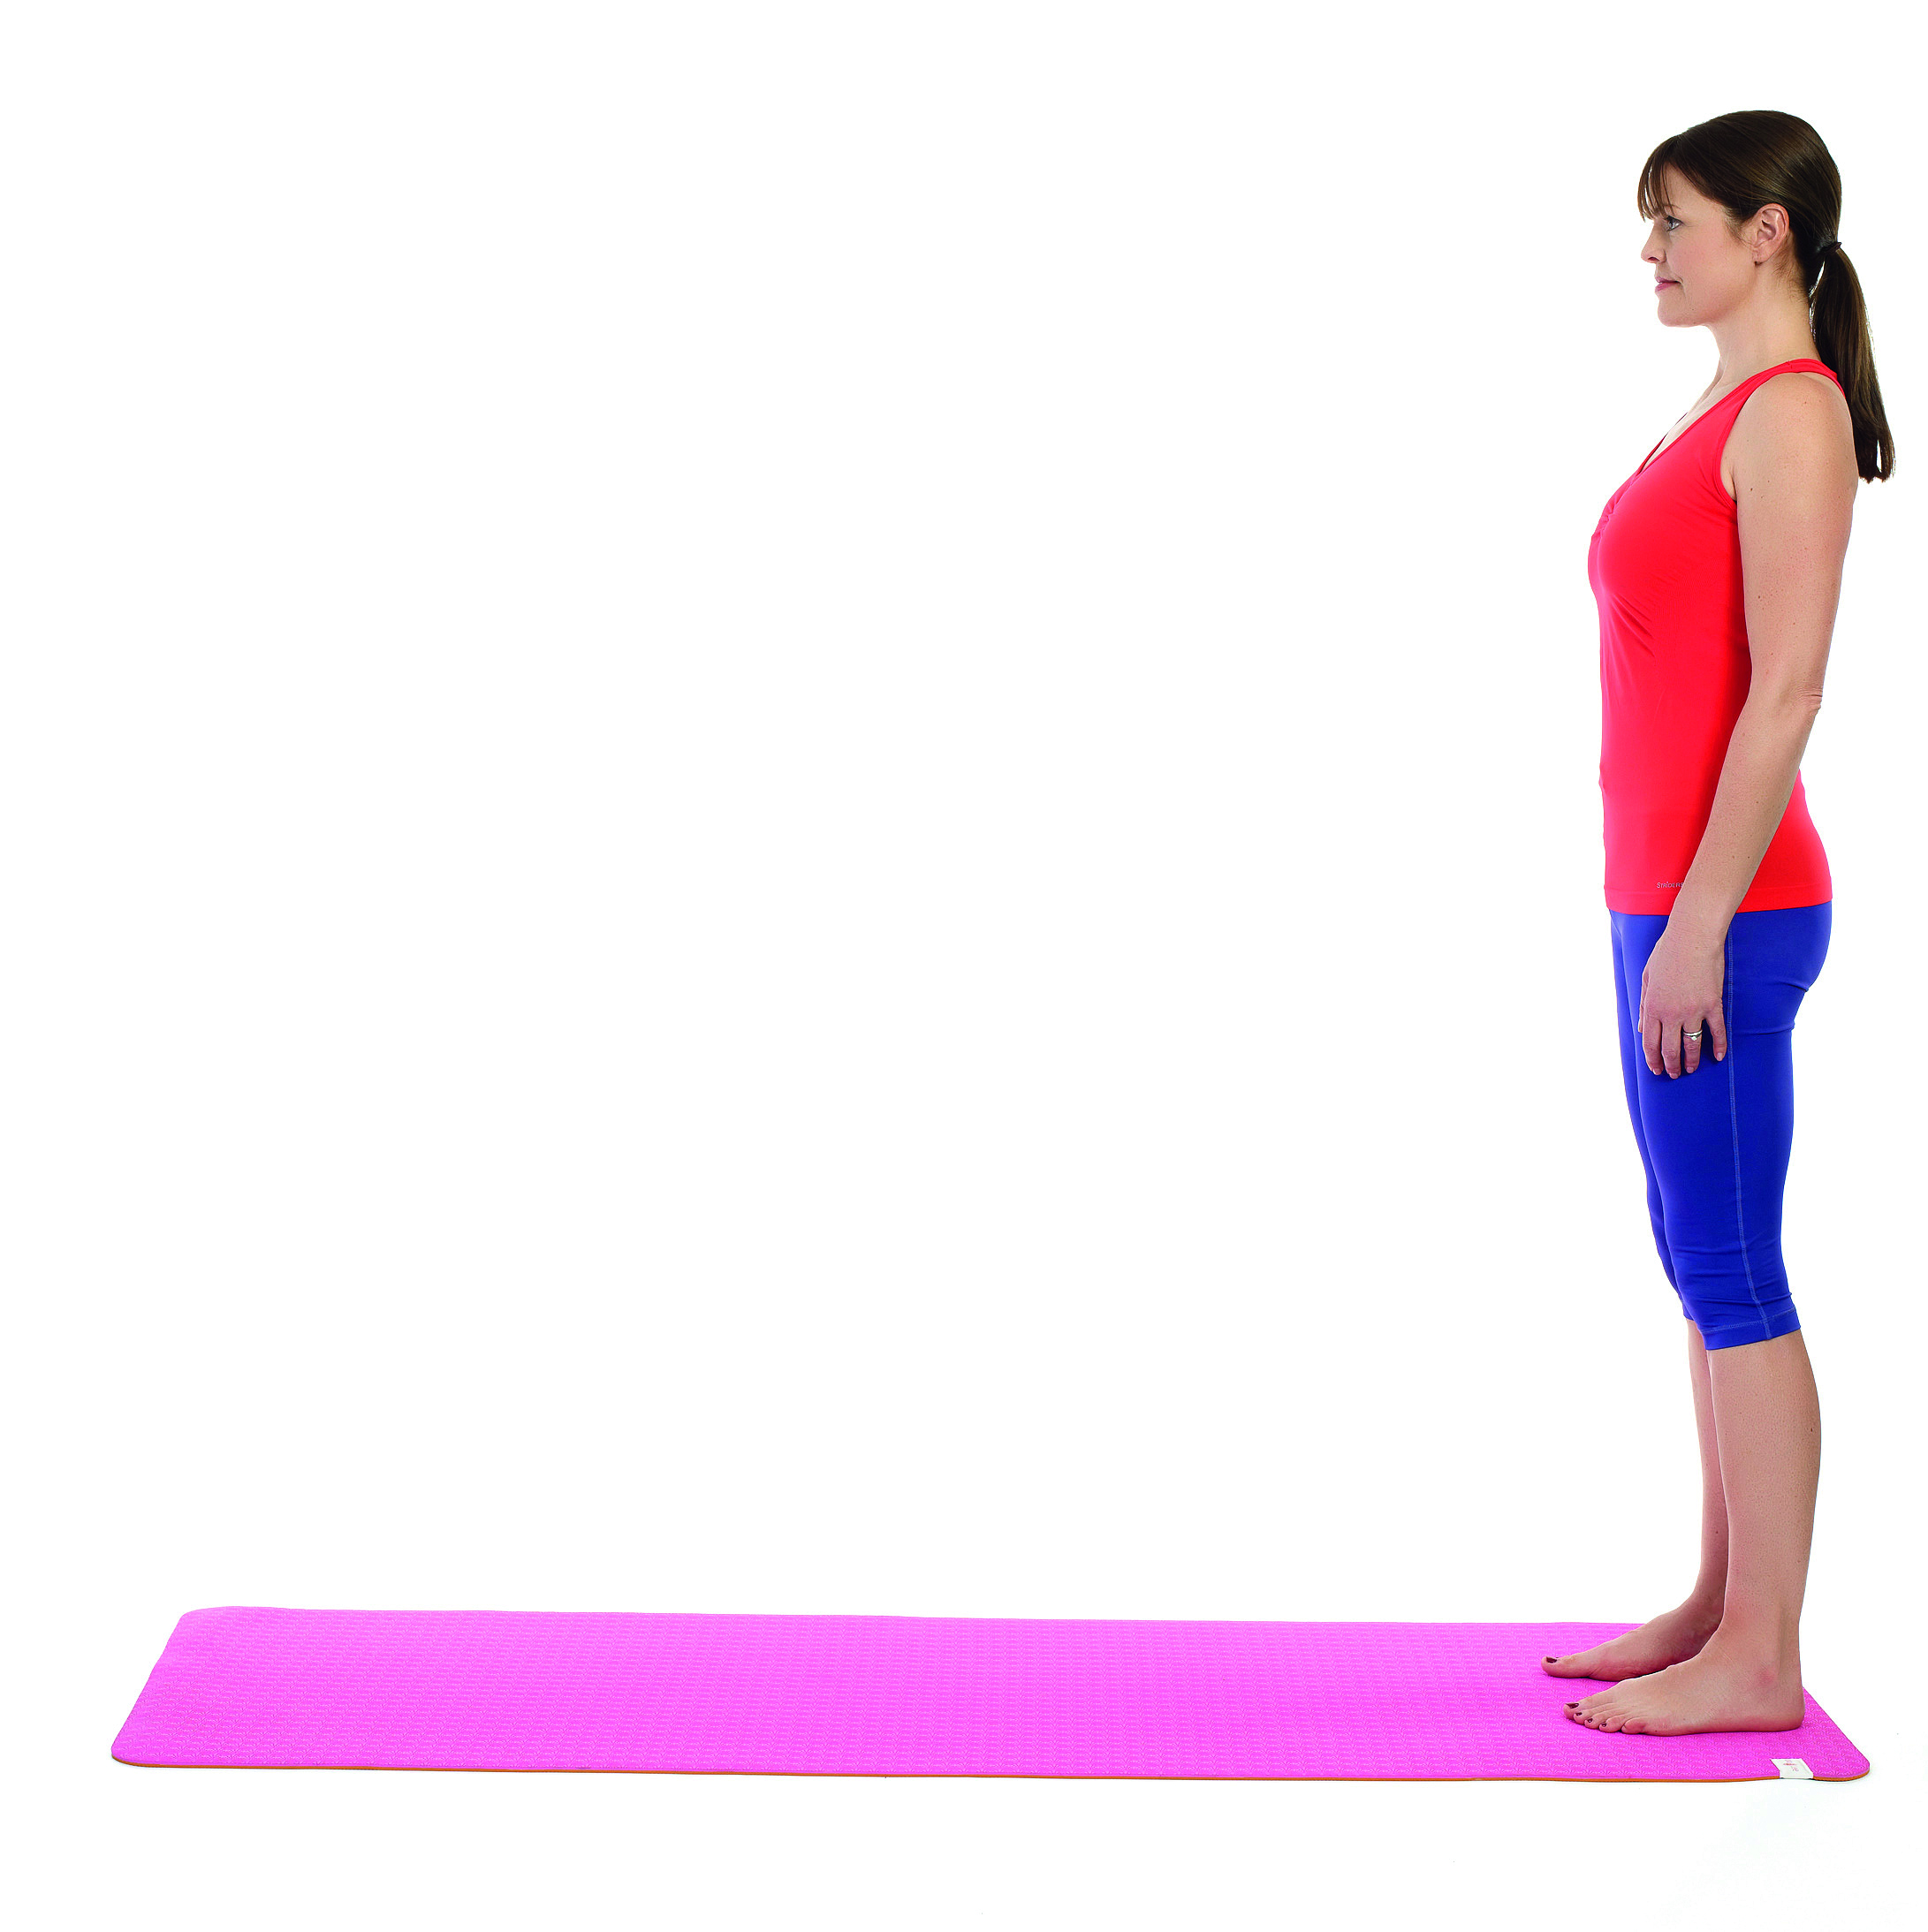 Pilates Mat Exercises: Progressions for the Roll Up on the Mat 